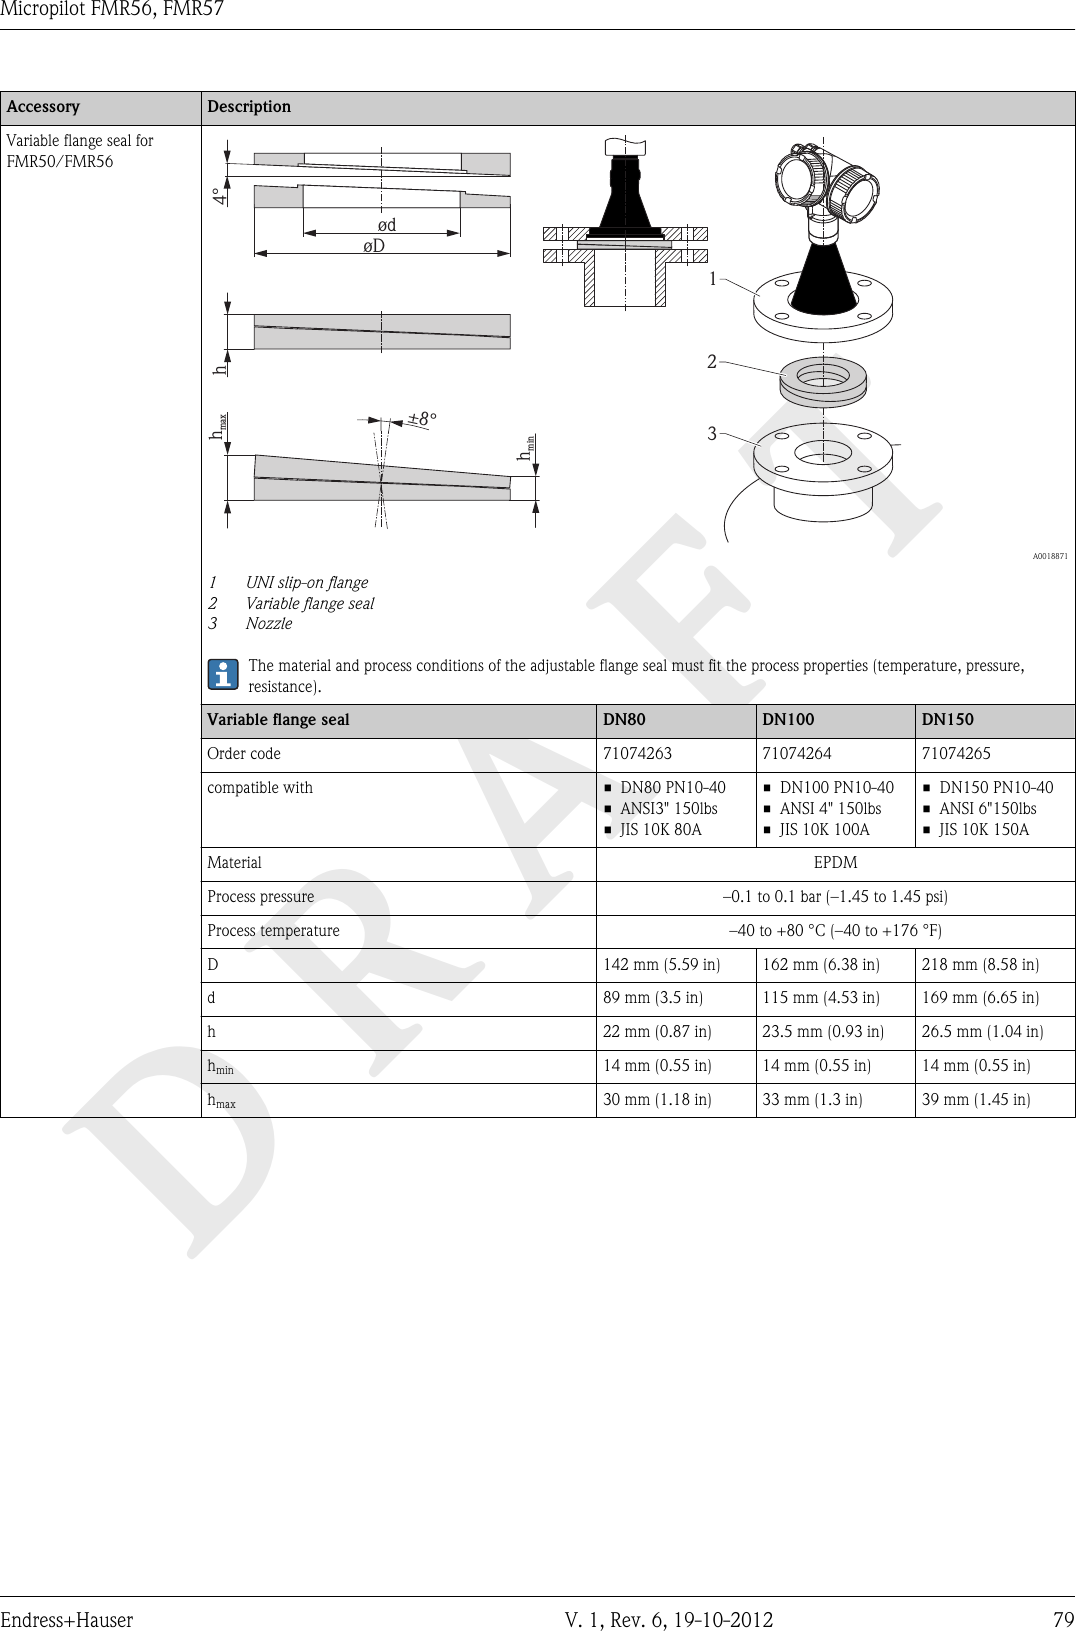 DRAFTMicropilot FMR56, FMR57Endress+Hauser V. 1, Rev. 6, 19-10-2012 79Accessory DescriptionVariable flange seal forFMR50/FMR56h2314°øDødhmaxhmin±8°  A00188711UNI slip-on flange2 Variable flange seal3 NozzleThe material and process conditions of the adjustable flange seal must fit the process properties (temperature, pressure,resistance).Variable flange seal DN80 DN100 DN150Order code 71074263 71074264 71074265compatible with • DN80 PN10-40• ANSI3&quot; 150lbs• JIS 10K 80A• DN100 PN10-40• ANSI 4&quot; 150lbs• JIS 10K 100A• DN150 PN10-40• ANSI 6&quot;150lbs• JIS 10K 150AMaterial EPDMProcess pressure –0.1 to 0.1 bar (–1.45 to 1.45 psi)Process temperature –40 to +80 °C (–40 to +176 °F)D 142 mm (5.59 in) 162 mm (6.38 in) 218 mm (8.58 in)d 89 mm (3.5 in) 115 mm (4.53 in) 169 mm (6.65 in)h 22 mm (0.87 in) 23.5 mm (0.93 in) 26.5 mm (1.04 in)hmin 14 mm (0.55 in) 14 mm (0.55 in) 14 mm (0.55 in)hmax 30 mm (1.18 in) 33 mm (1.3 in) 39 mm (1.45 in)